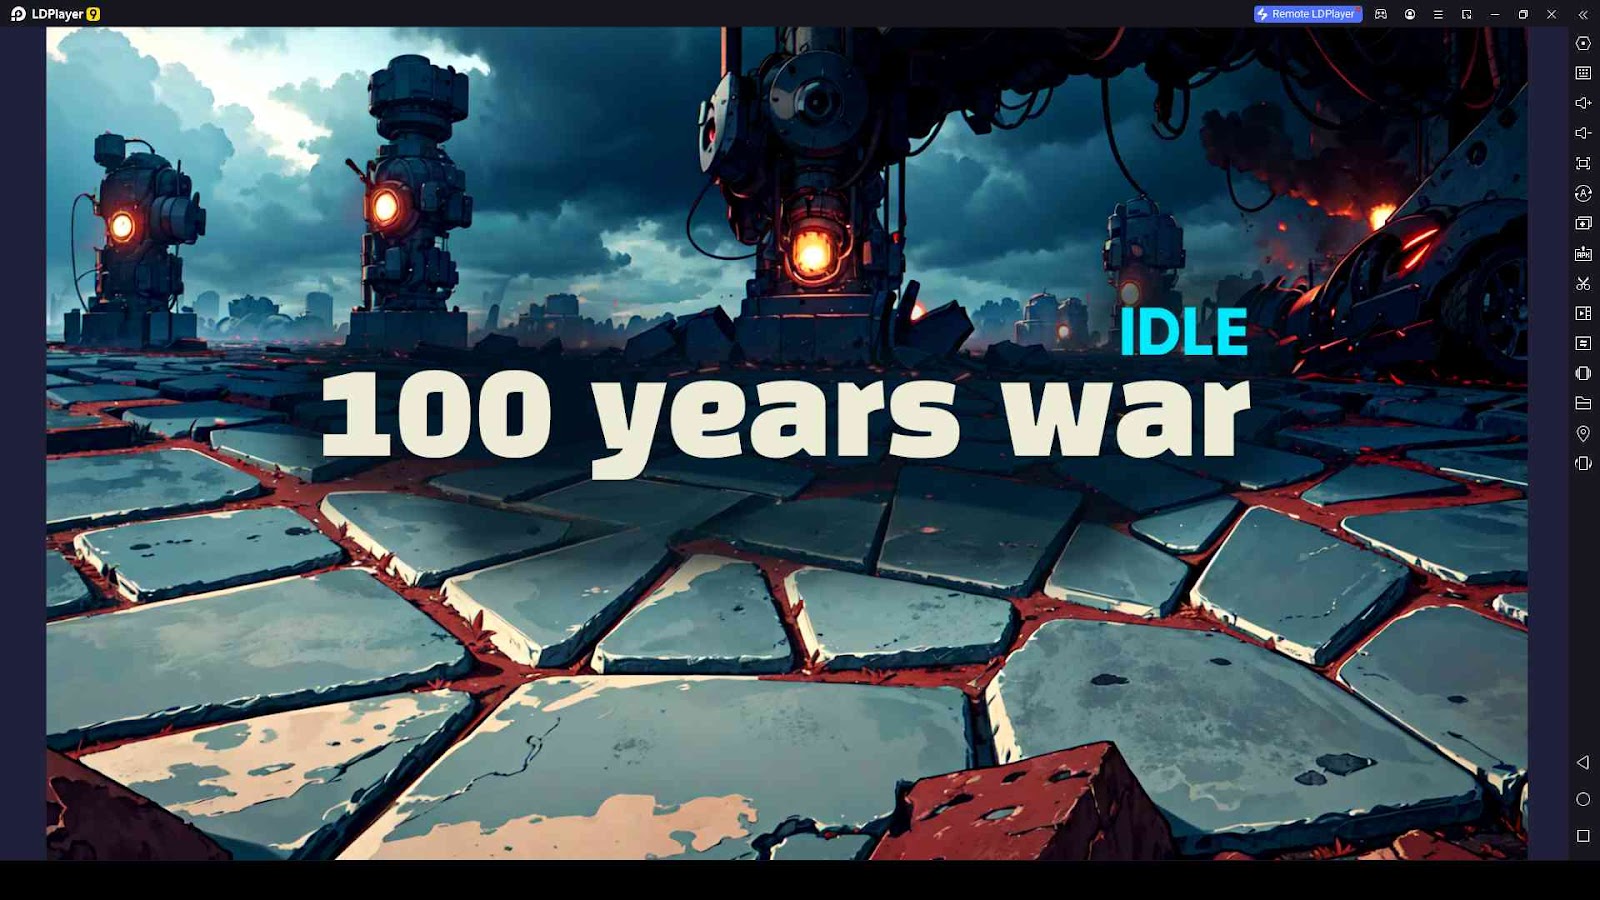 100 years war – Idle Beginner Tips and Tricks